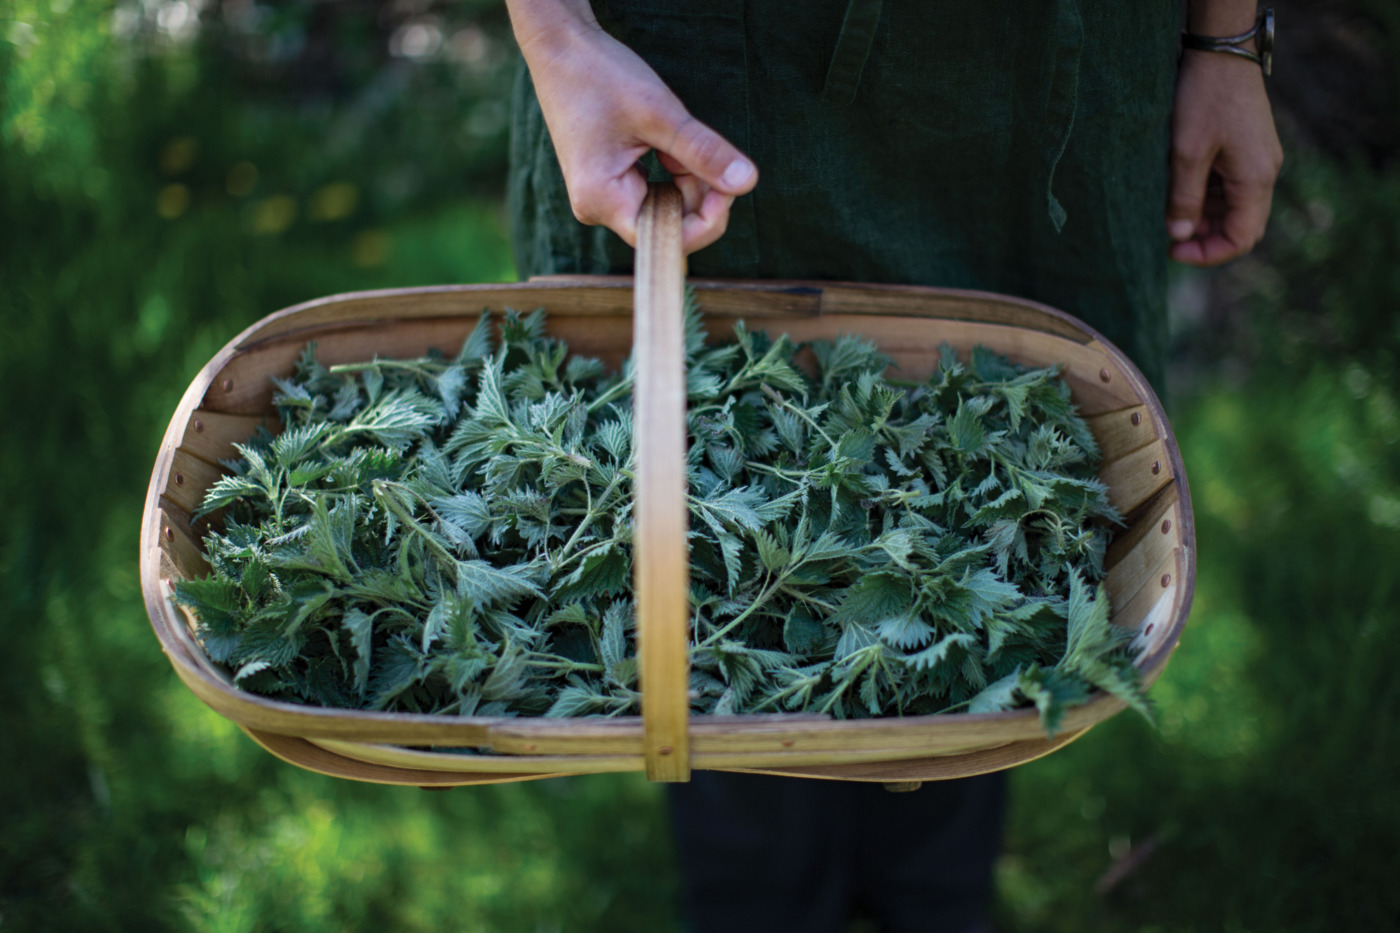 A hand holds a basket of harvested nettles.